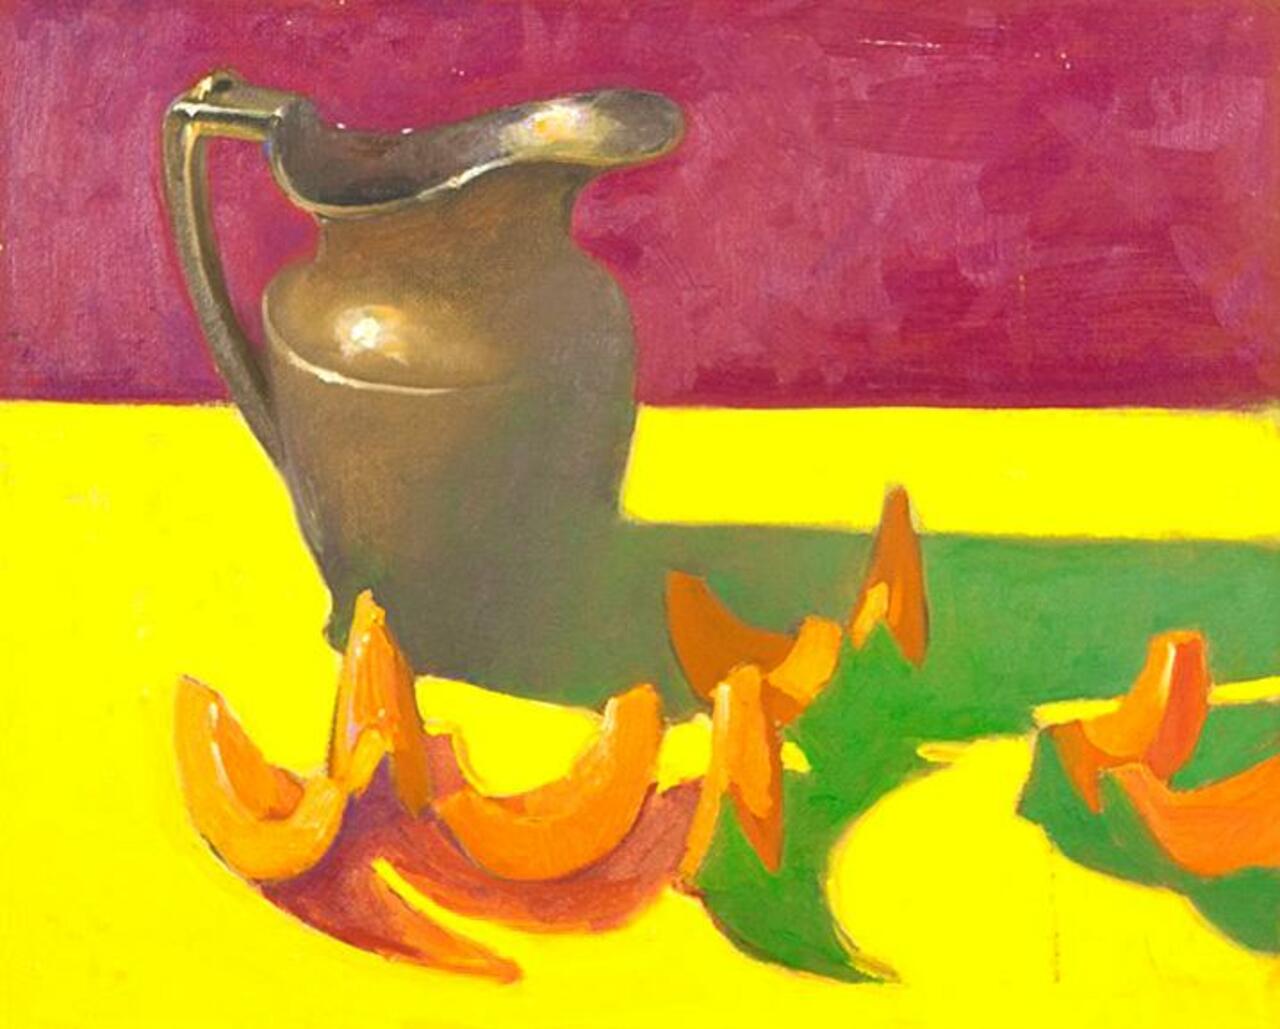 #Poole #Painting of the Day! "Pitcheresque" 14x17 Oil on Board #Oklahoma #Art #Pop #StillLife http://t.co/m7OAYqiGqM